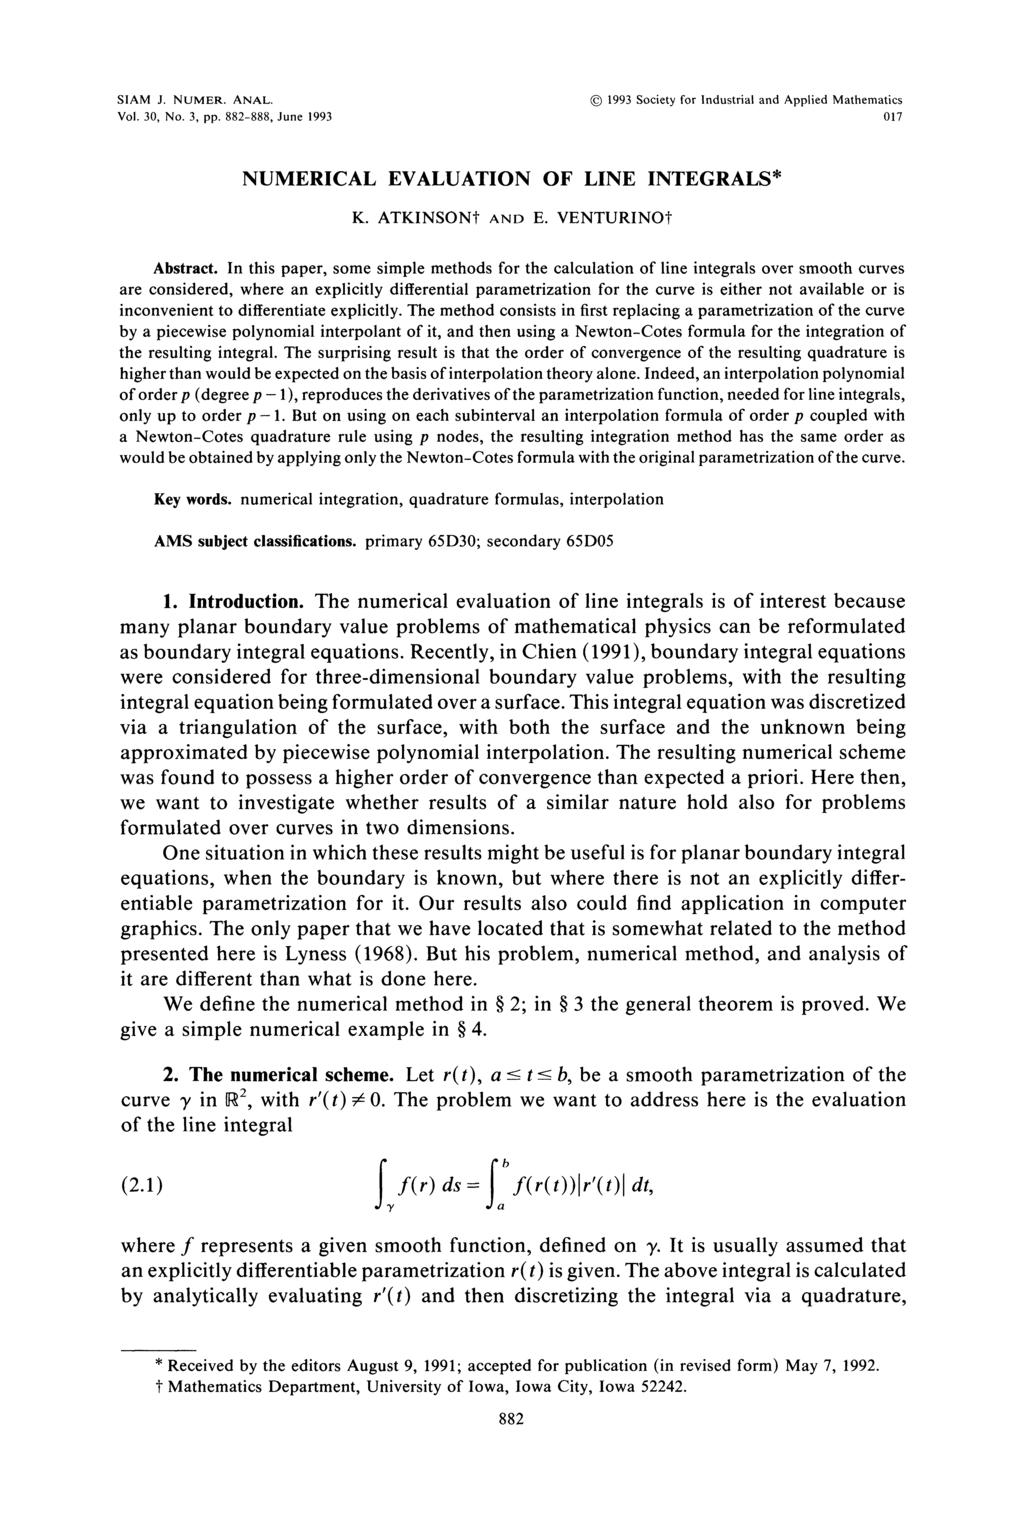 SIAM J. NUMER. ANAL. Vol. 30, No. 3, pp. 882-888, June 1993 (C) 1993 Society for Industrial and Applied Mathematics 017 NUMERICAL EVALUATION OF LINE INTEGRALS* K. ATKINSONt AND E. VENTURINOt Abstract.